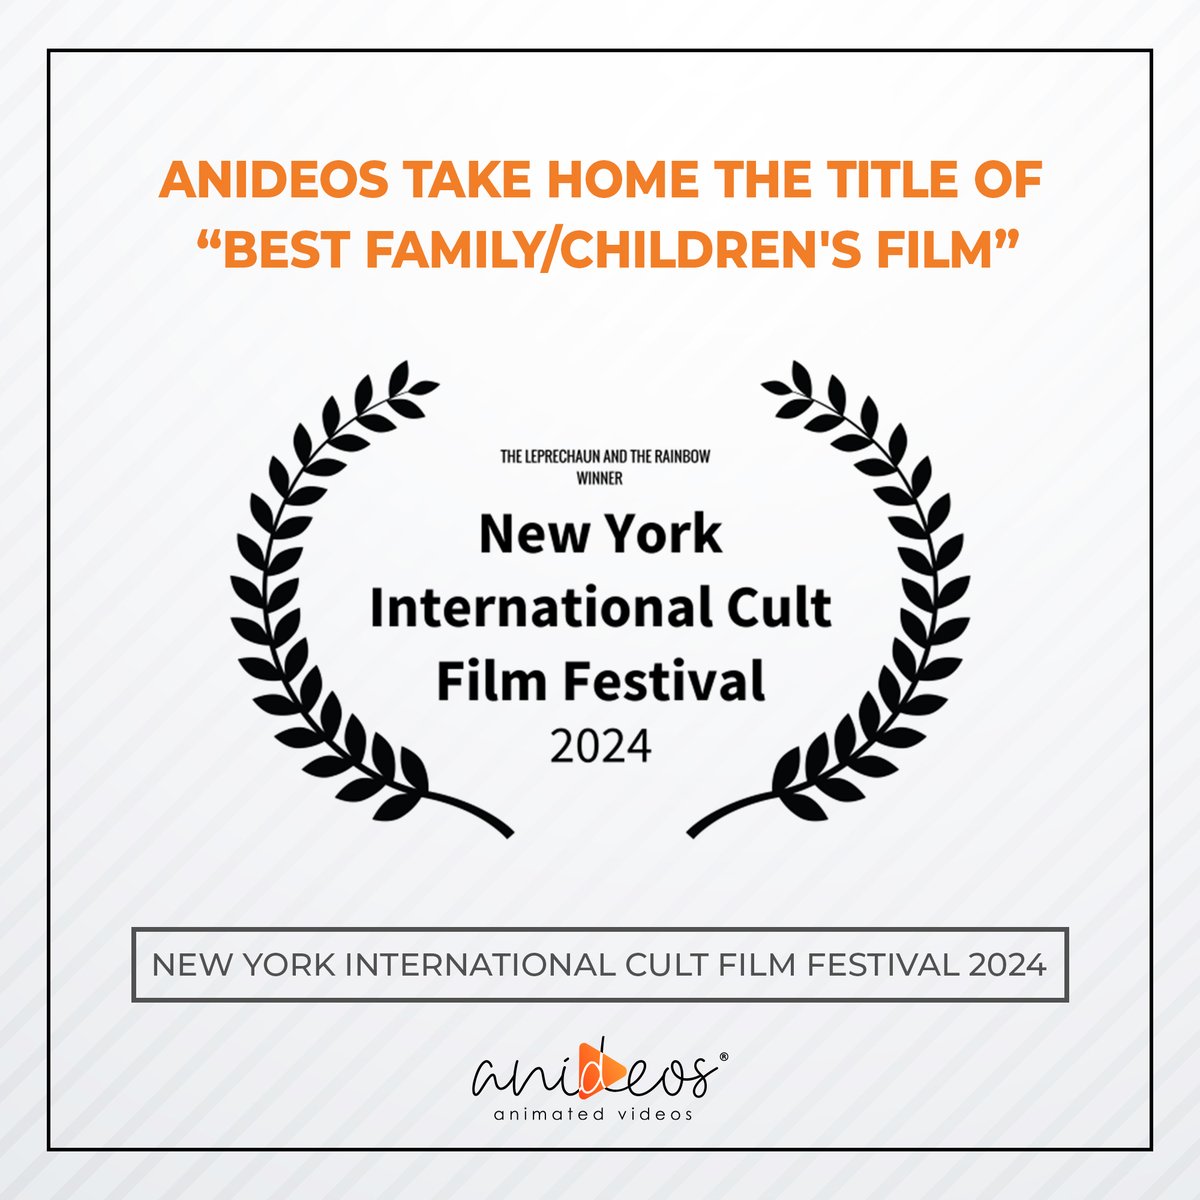 We are thrilled to announce that Anideos has won 'Best Family/Children's Film' at the New York International Cult Film Festival!

This award recognizes our dedication to crafting engaging content for audiences of all ages.

#Anideos #awards #recognition #FilmFestival